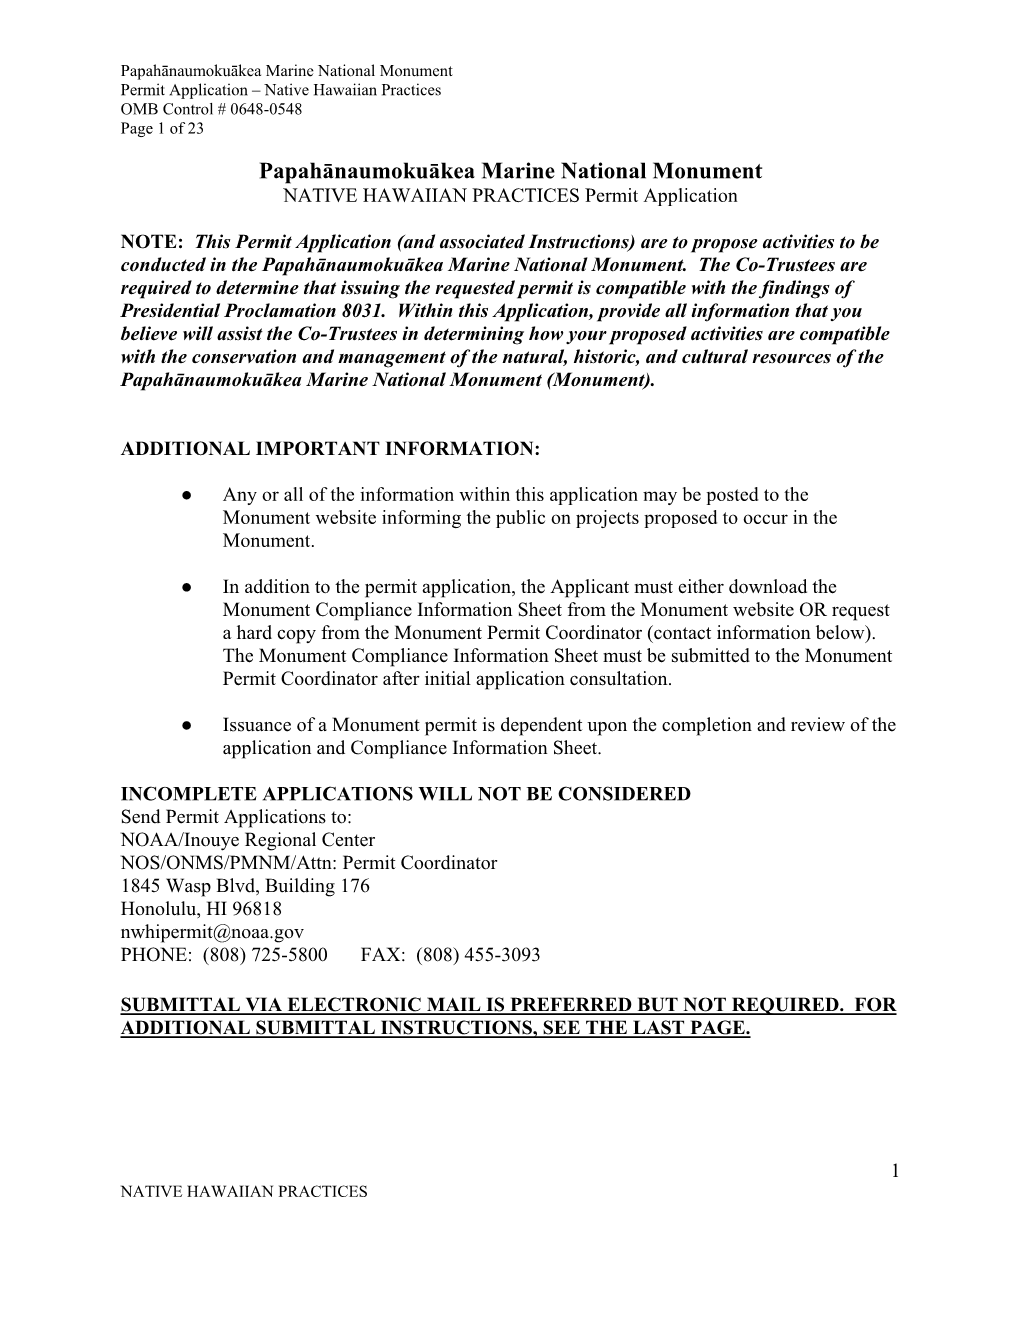 Application – Native Hawaiian Practices OMB Control # 0648-0548 Page 1 of 23